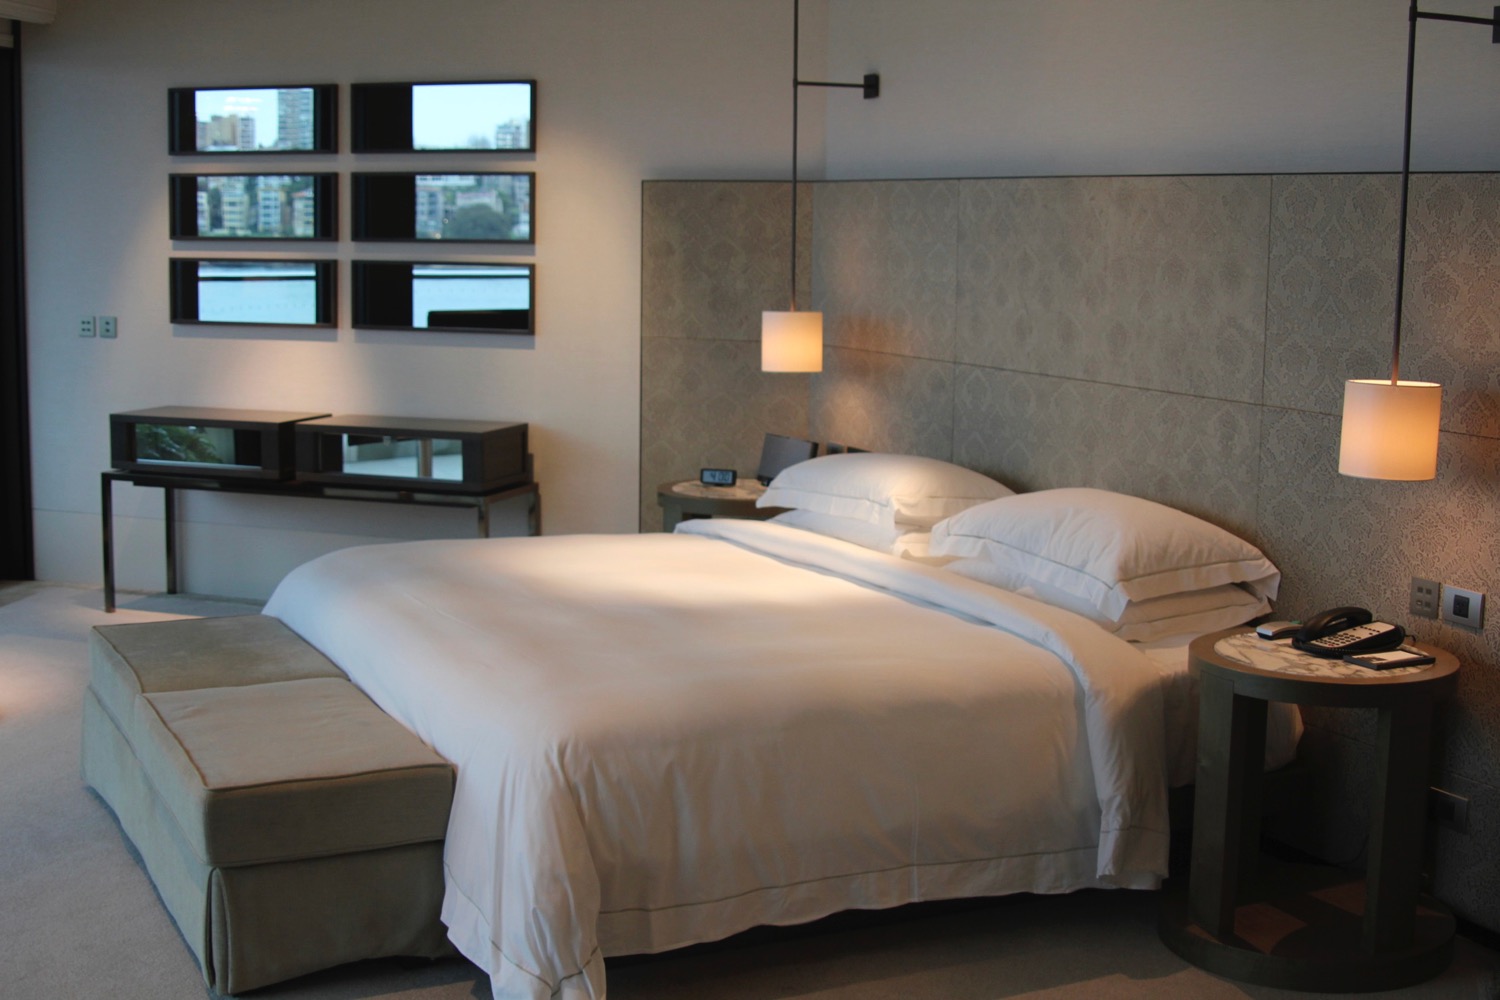 a bed with a large headboard and a lamp